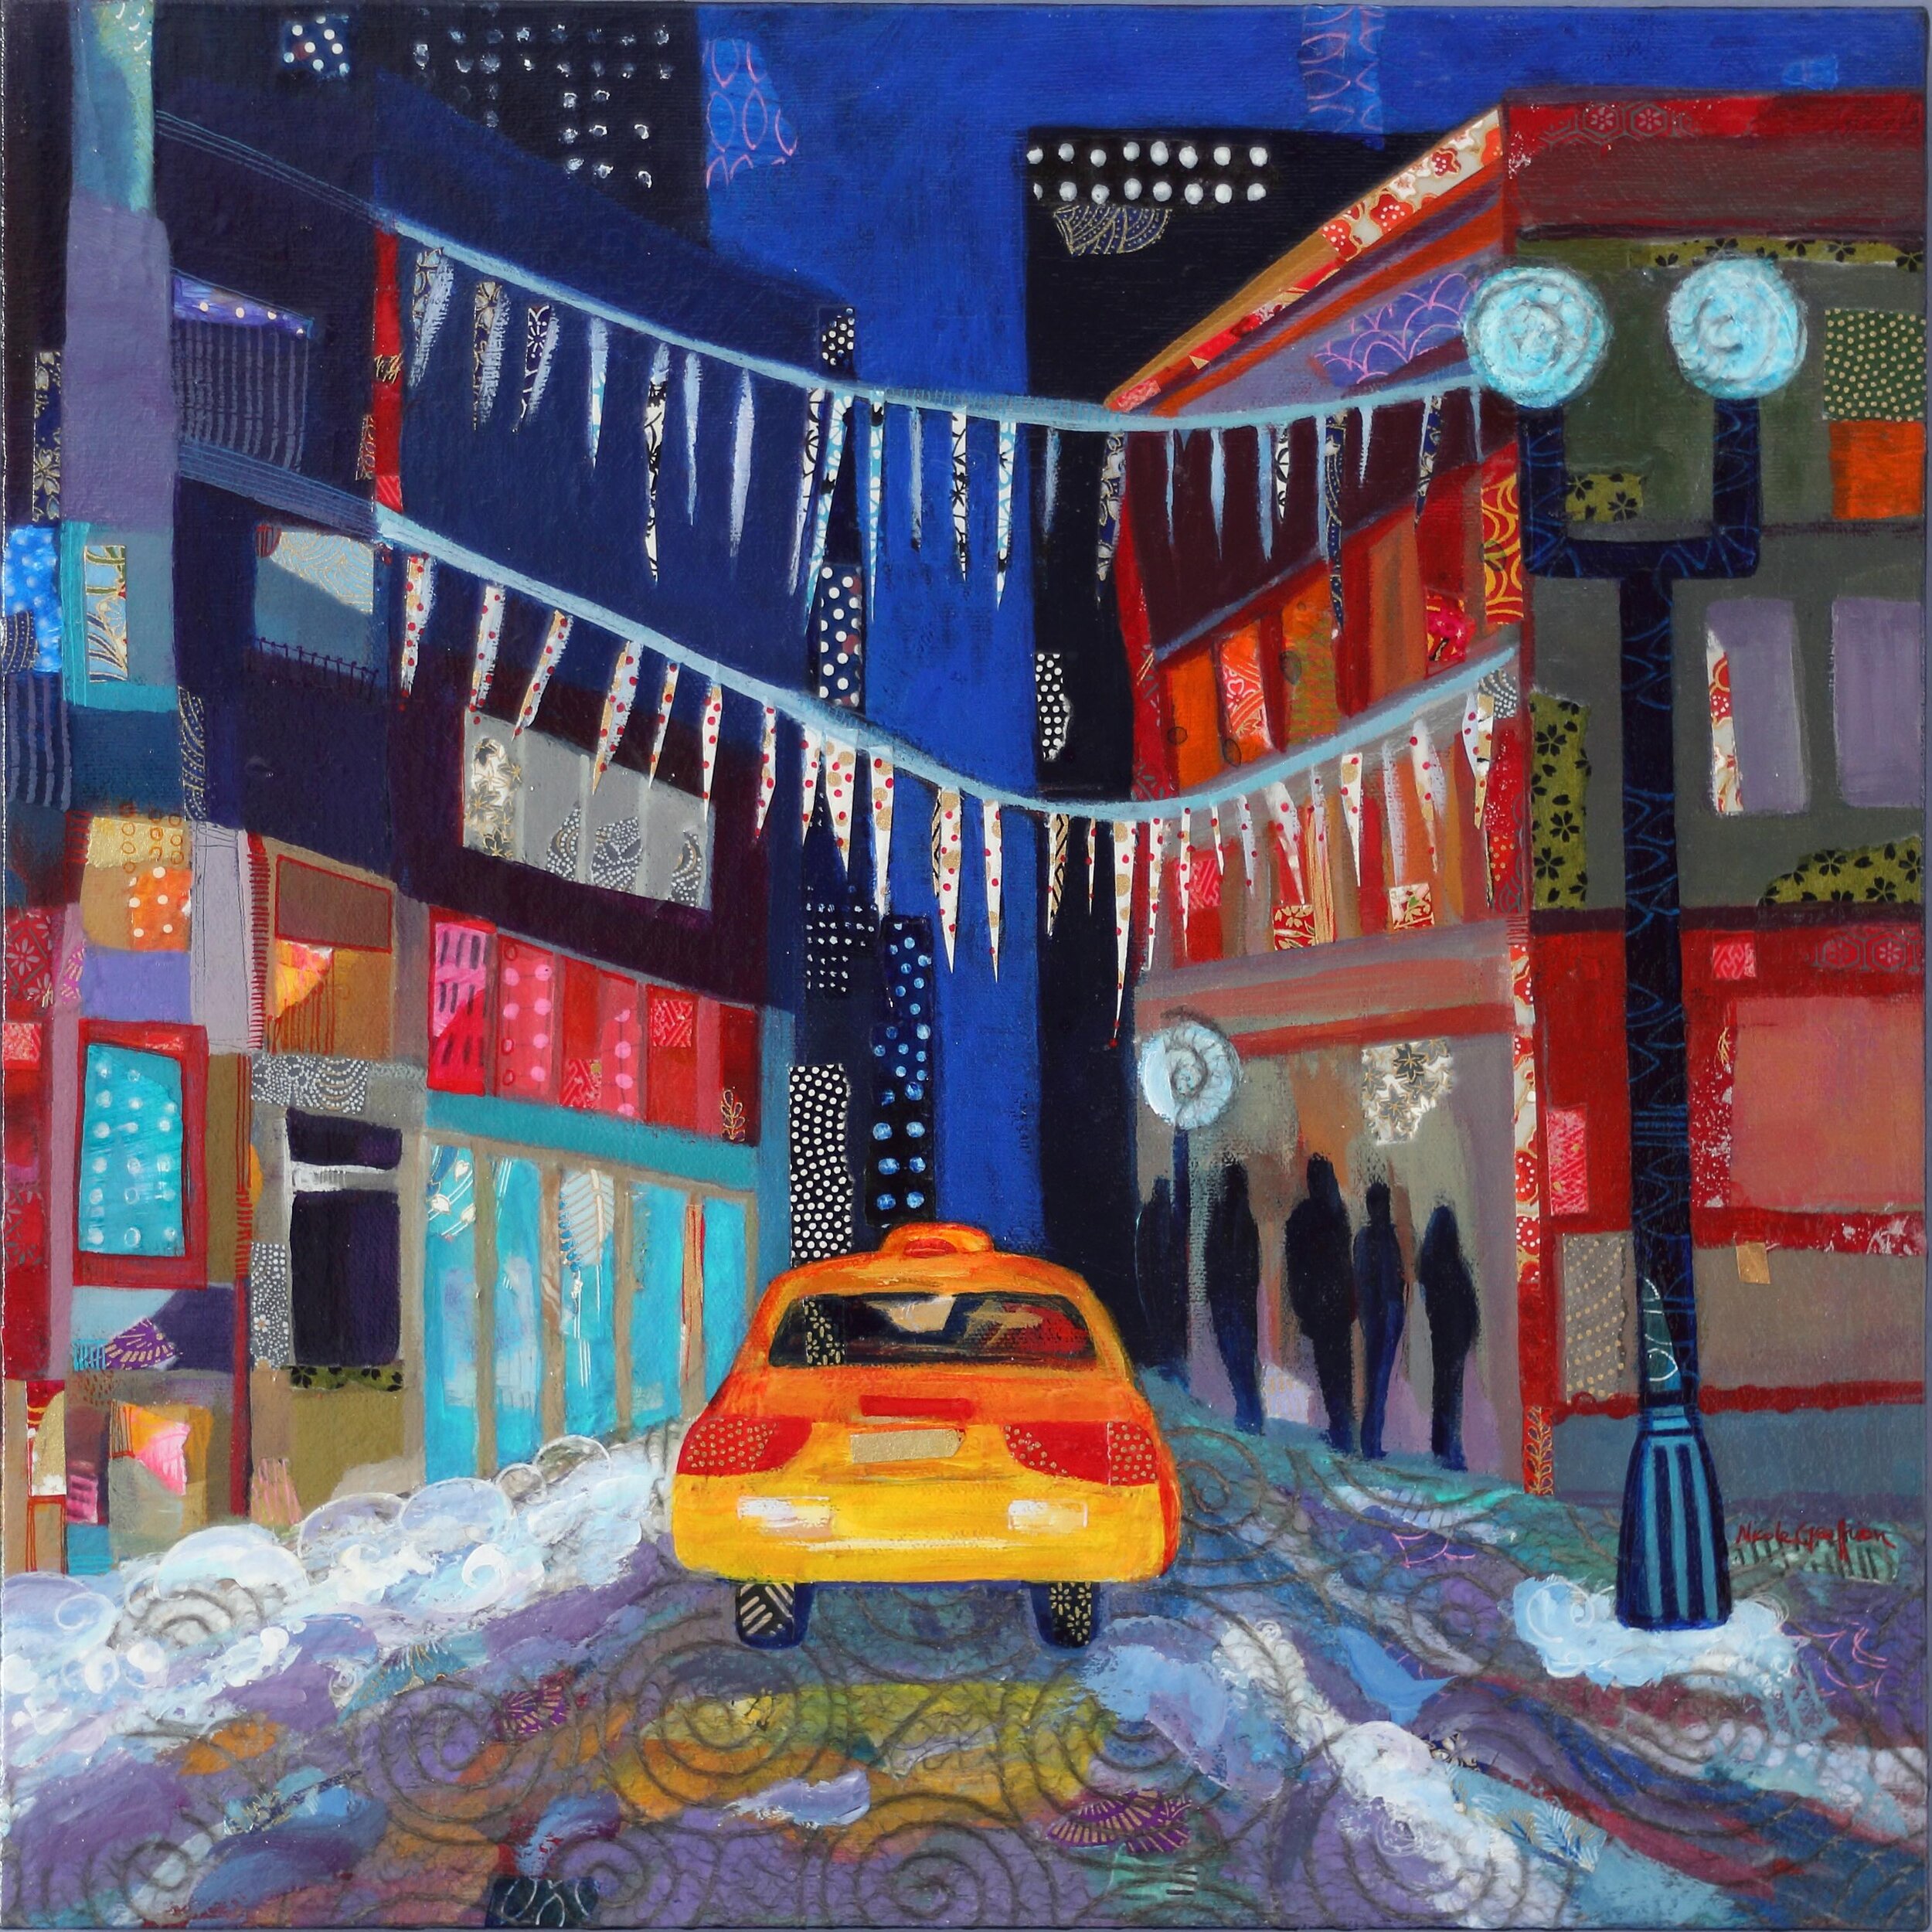 This winter&rsquo;s downtown scene was inspired by a picture I took after a great dinner and evening , coming back home. 
 
&quot;A night, downtown&quot;/
&quot;Une nuit, en ville&quot; 

16&quot;x16&quot;
Mixed medium on canvas 

#artcollector #down